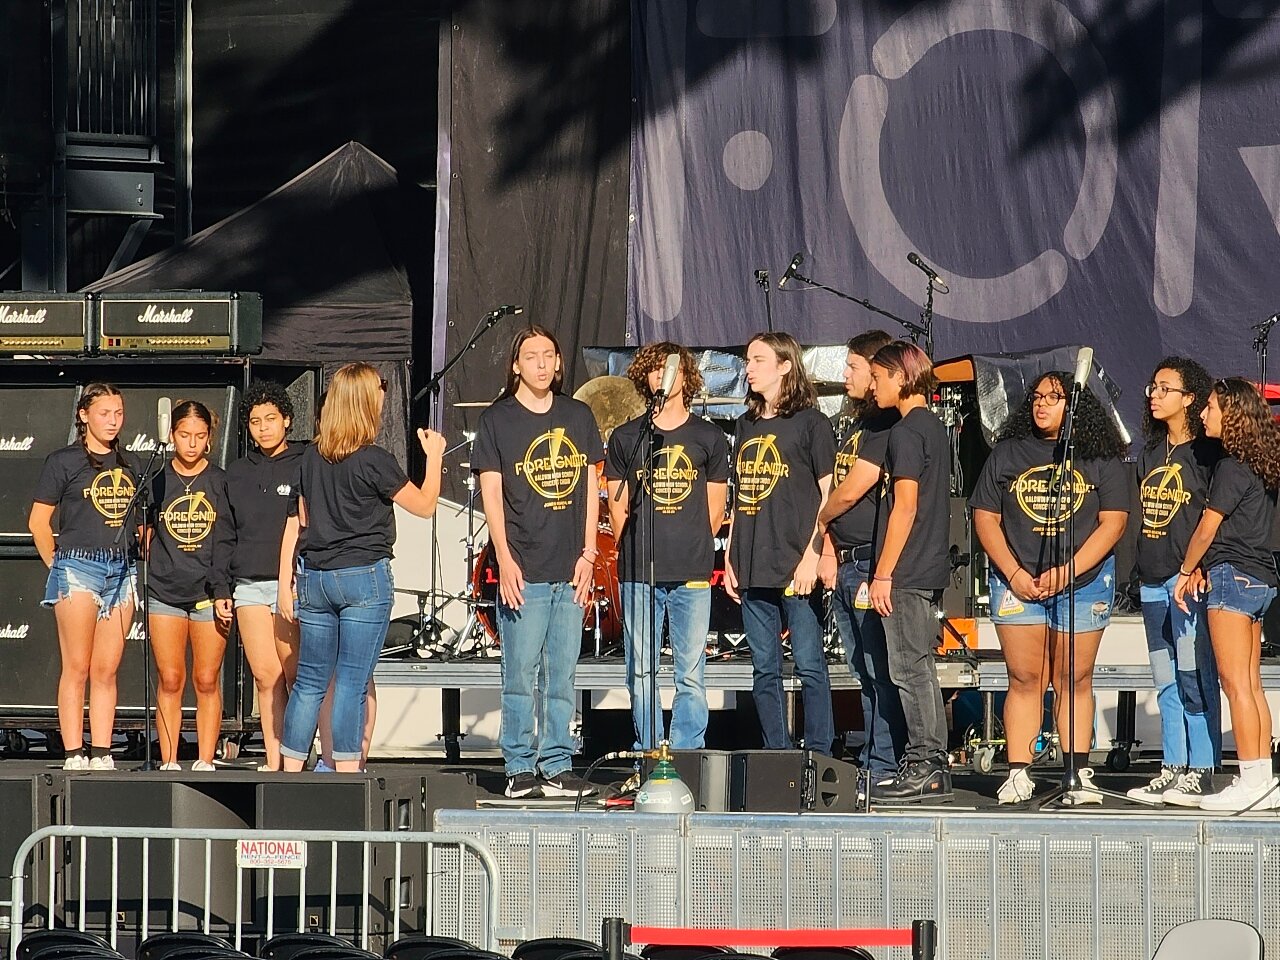 The Baldwin High School Choir opening for Foreigner and Loverboy.